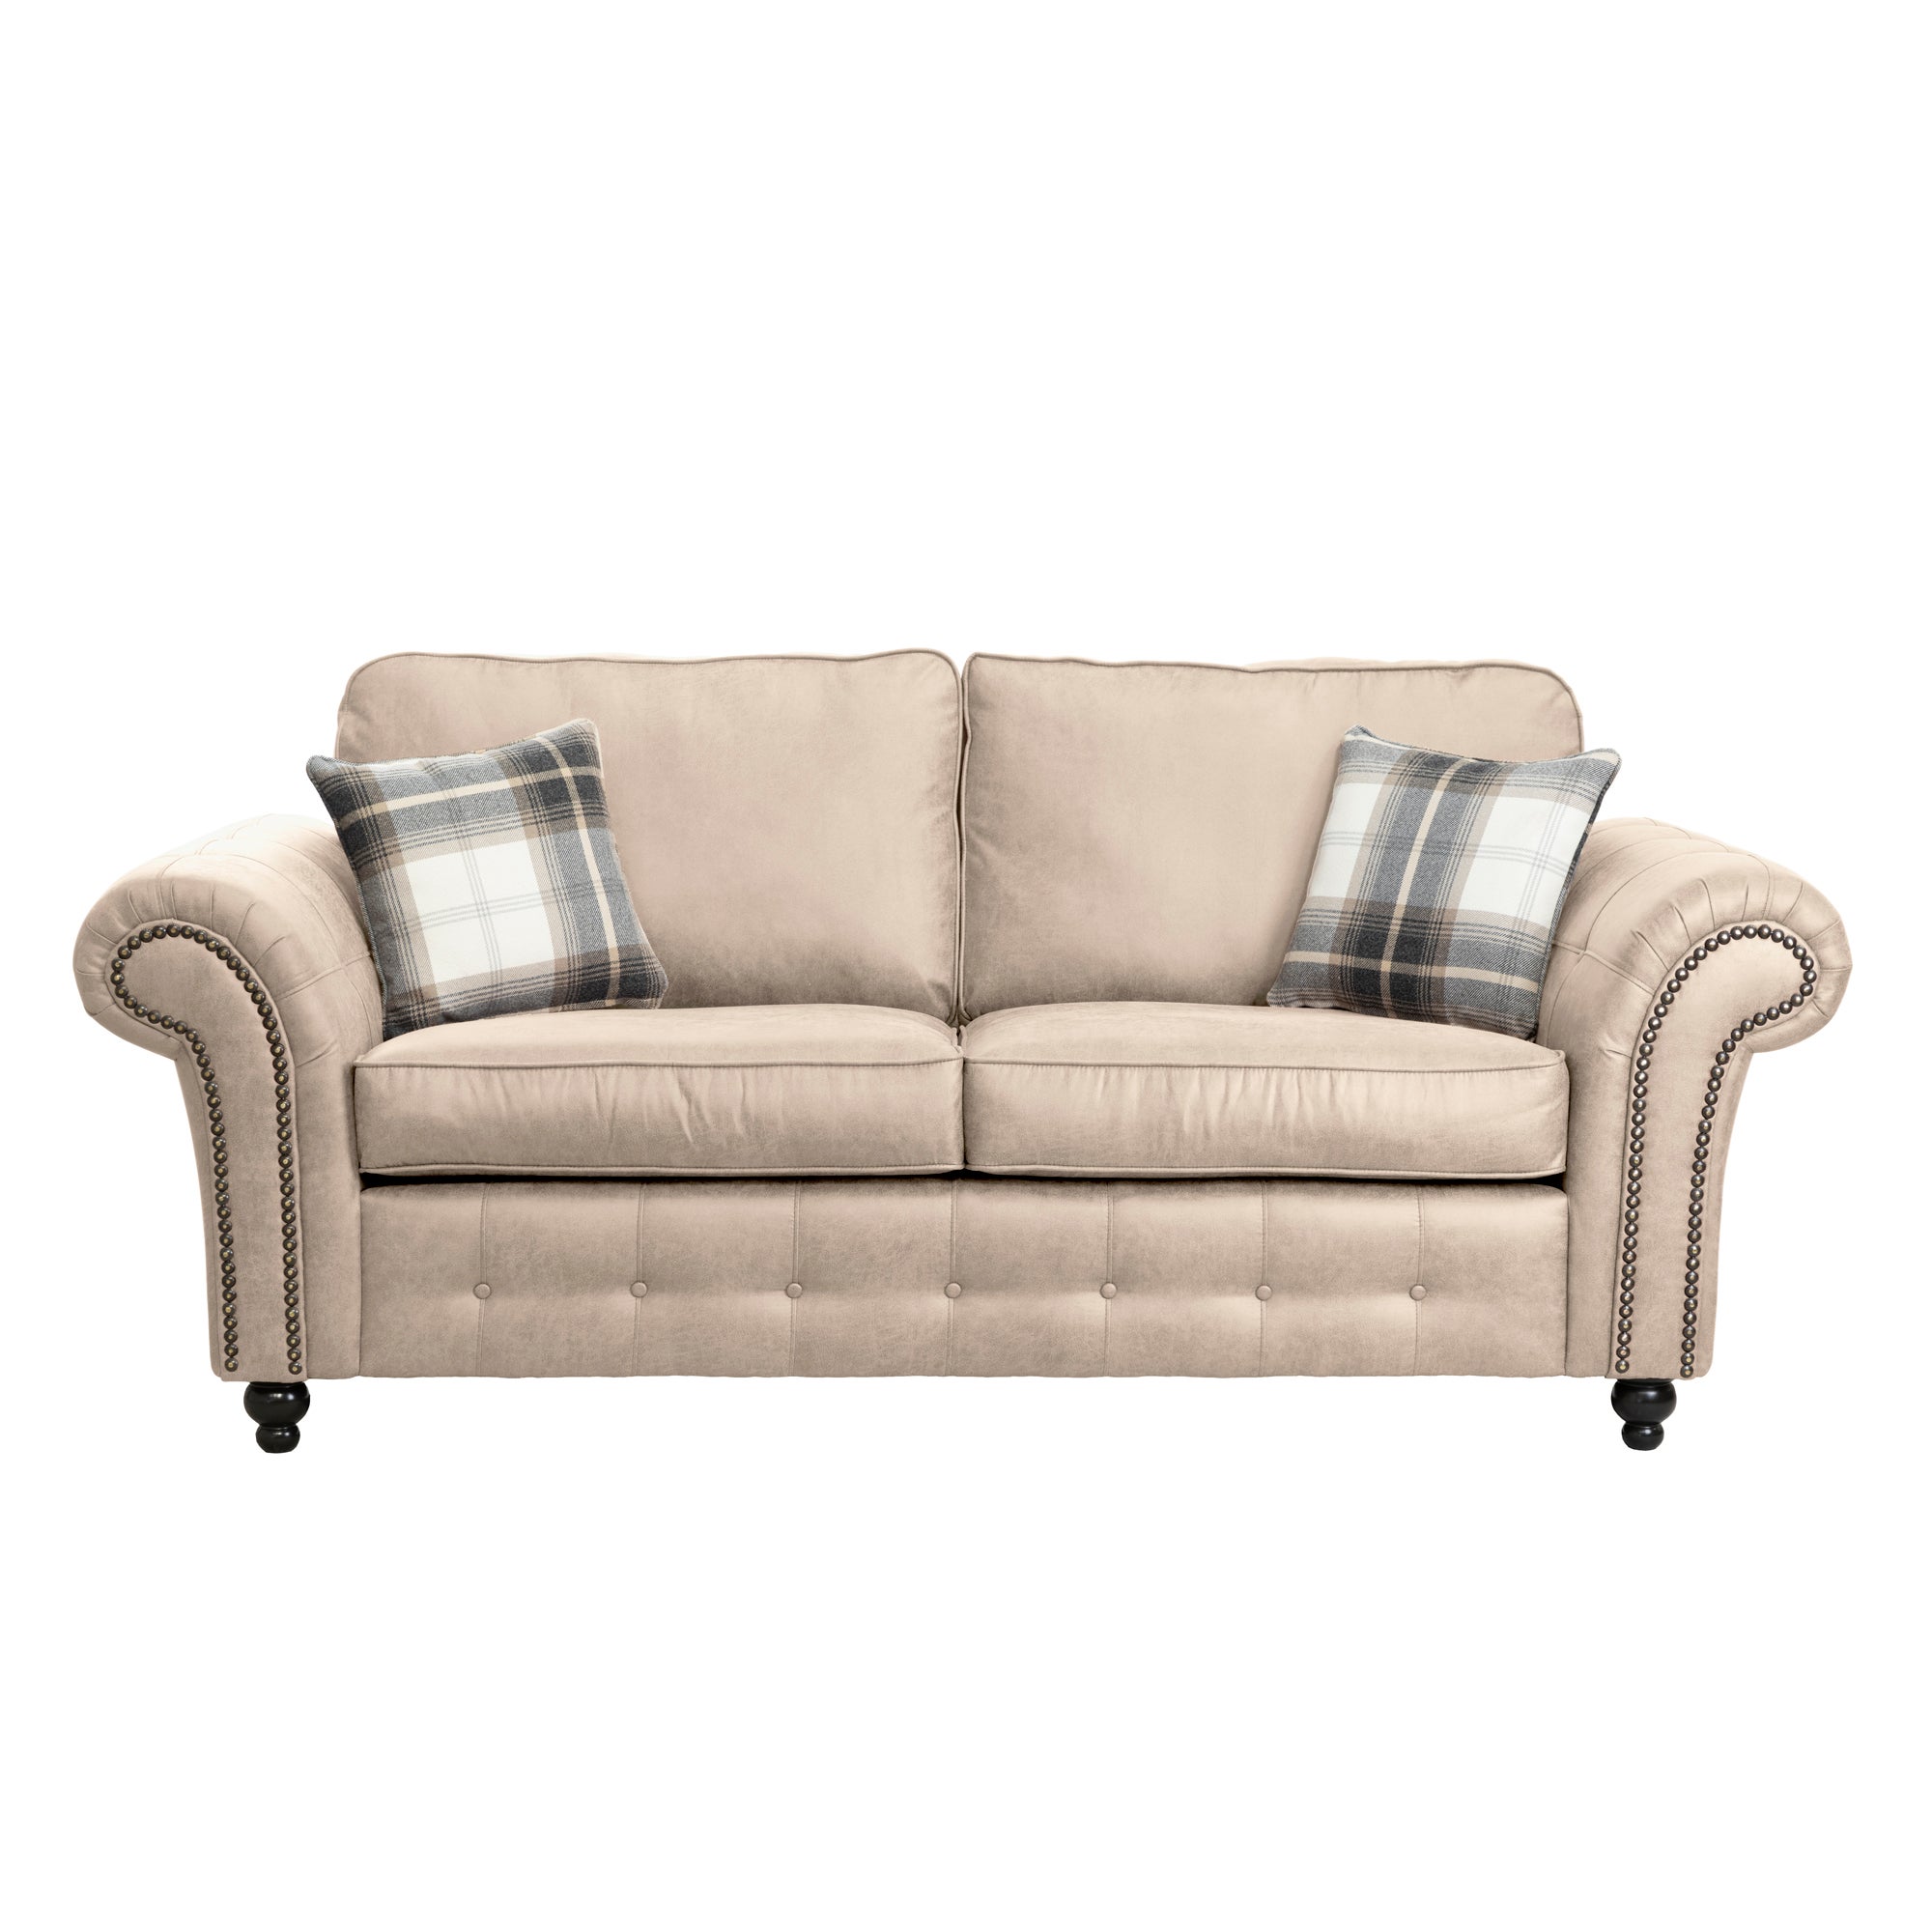 Oakland Soft Faux Leather 3 Seater Sofa Beige